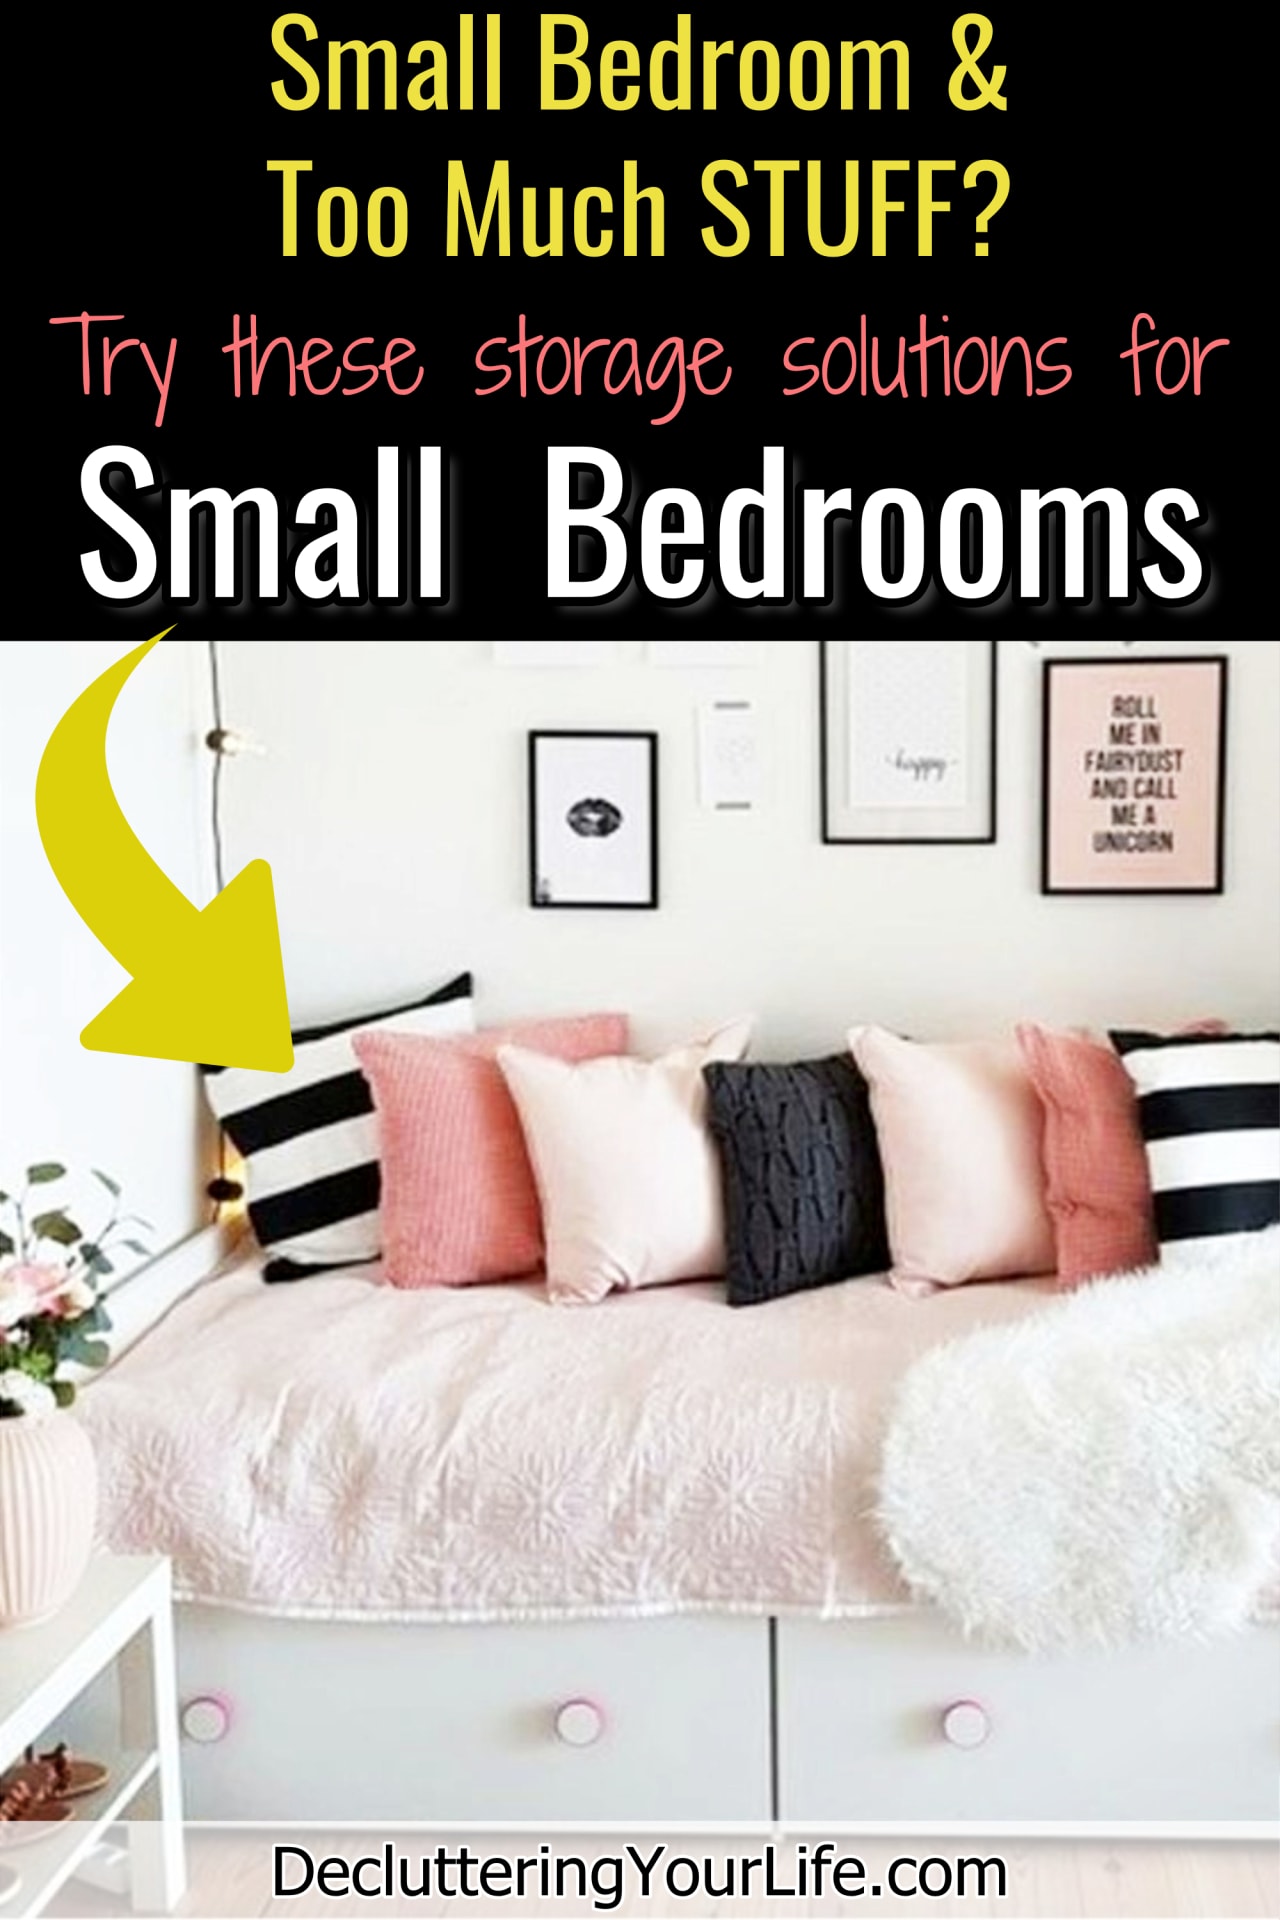 DIY small bedroom storage ideas - Staying organized in small spaces (like a small bedroom or small college dorm room) is hard when you have too much STUFF.How to declutter all the random junk in your bedroom with creative organizing tips and home storage and organization ideas for small bedrooms.  Easy ways to declutter your clutter from cluttered mess to organized success